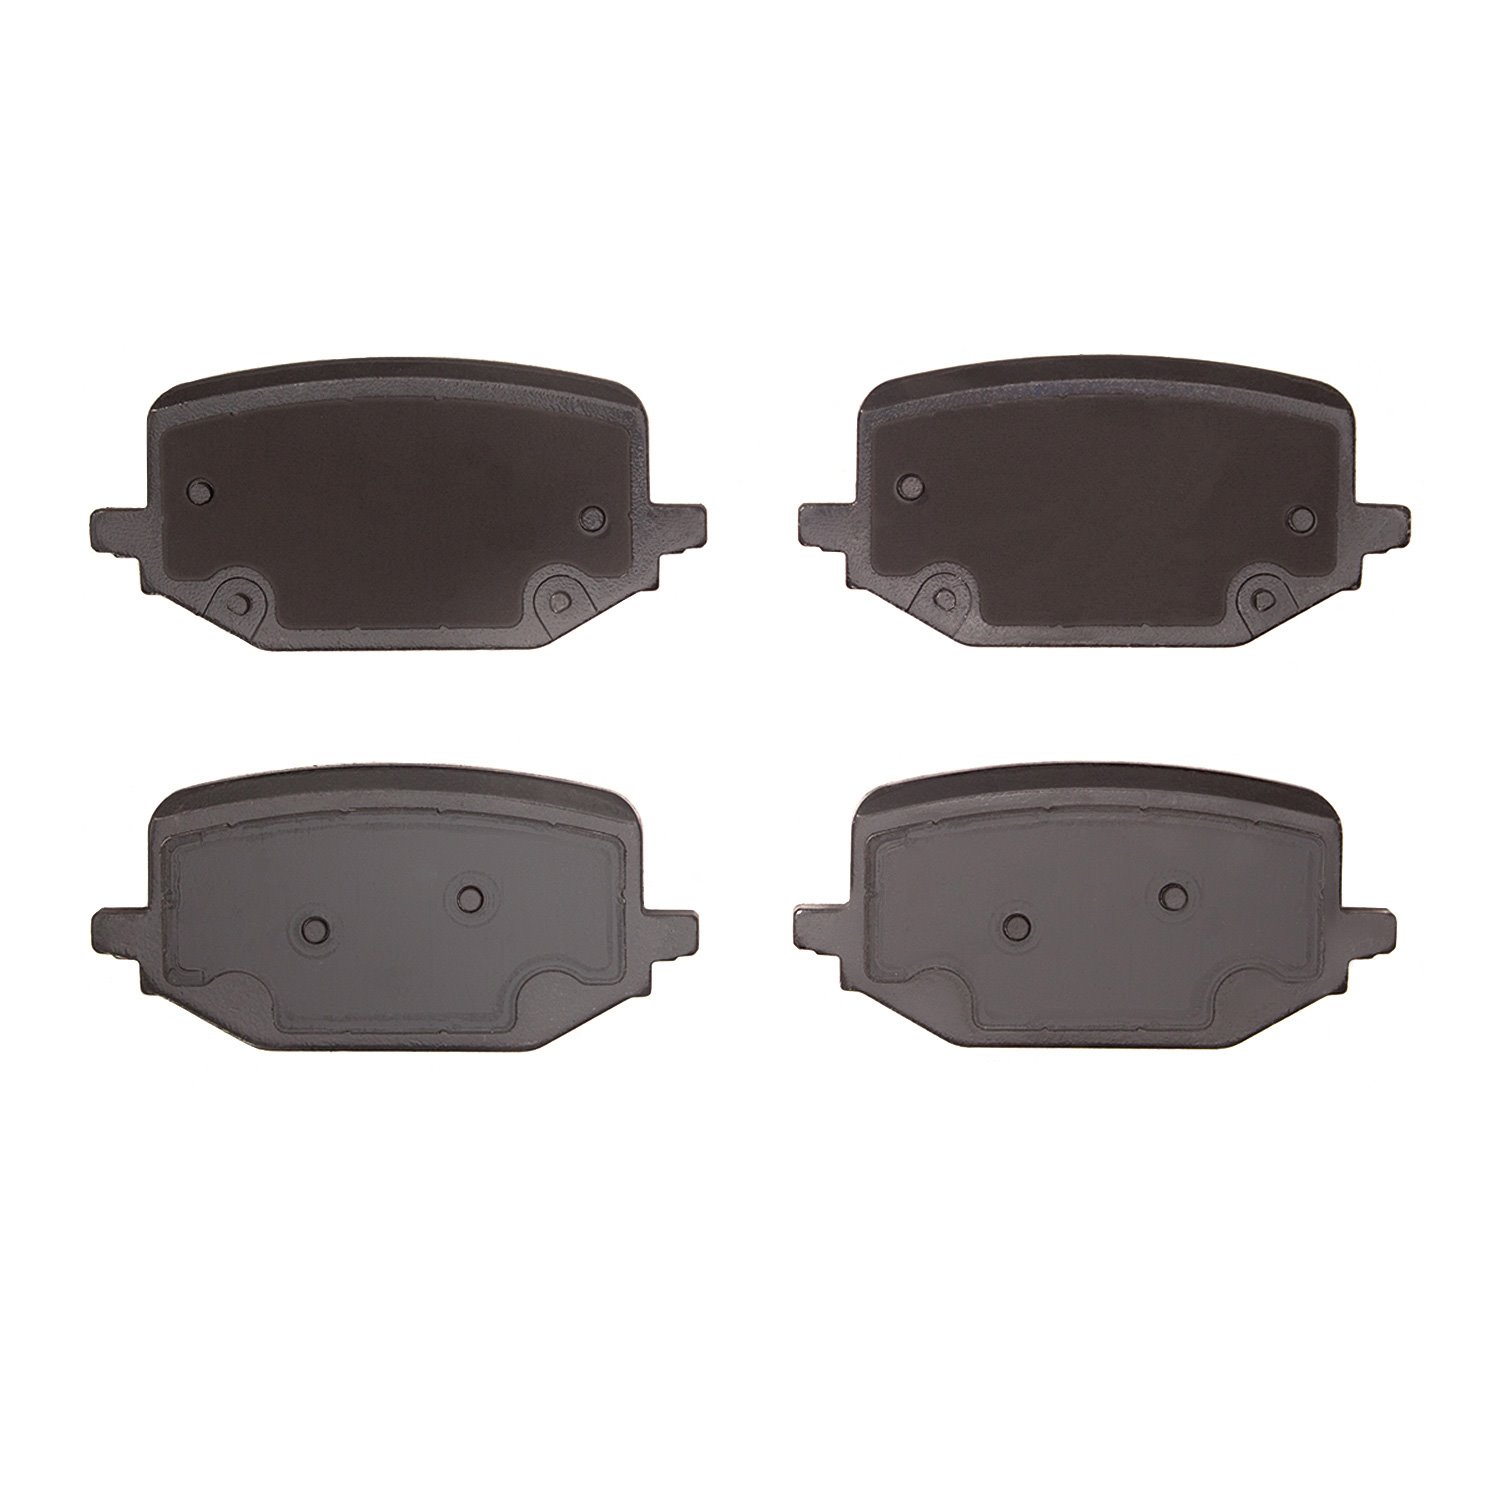 1310-2231-00 3000-Series Ceramic Brake Pads, Fits Select Ford/Lincoln/Mercury/Mazda, Position: Rear